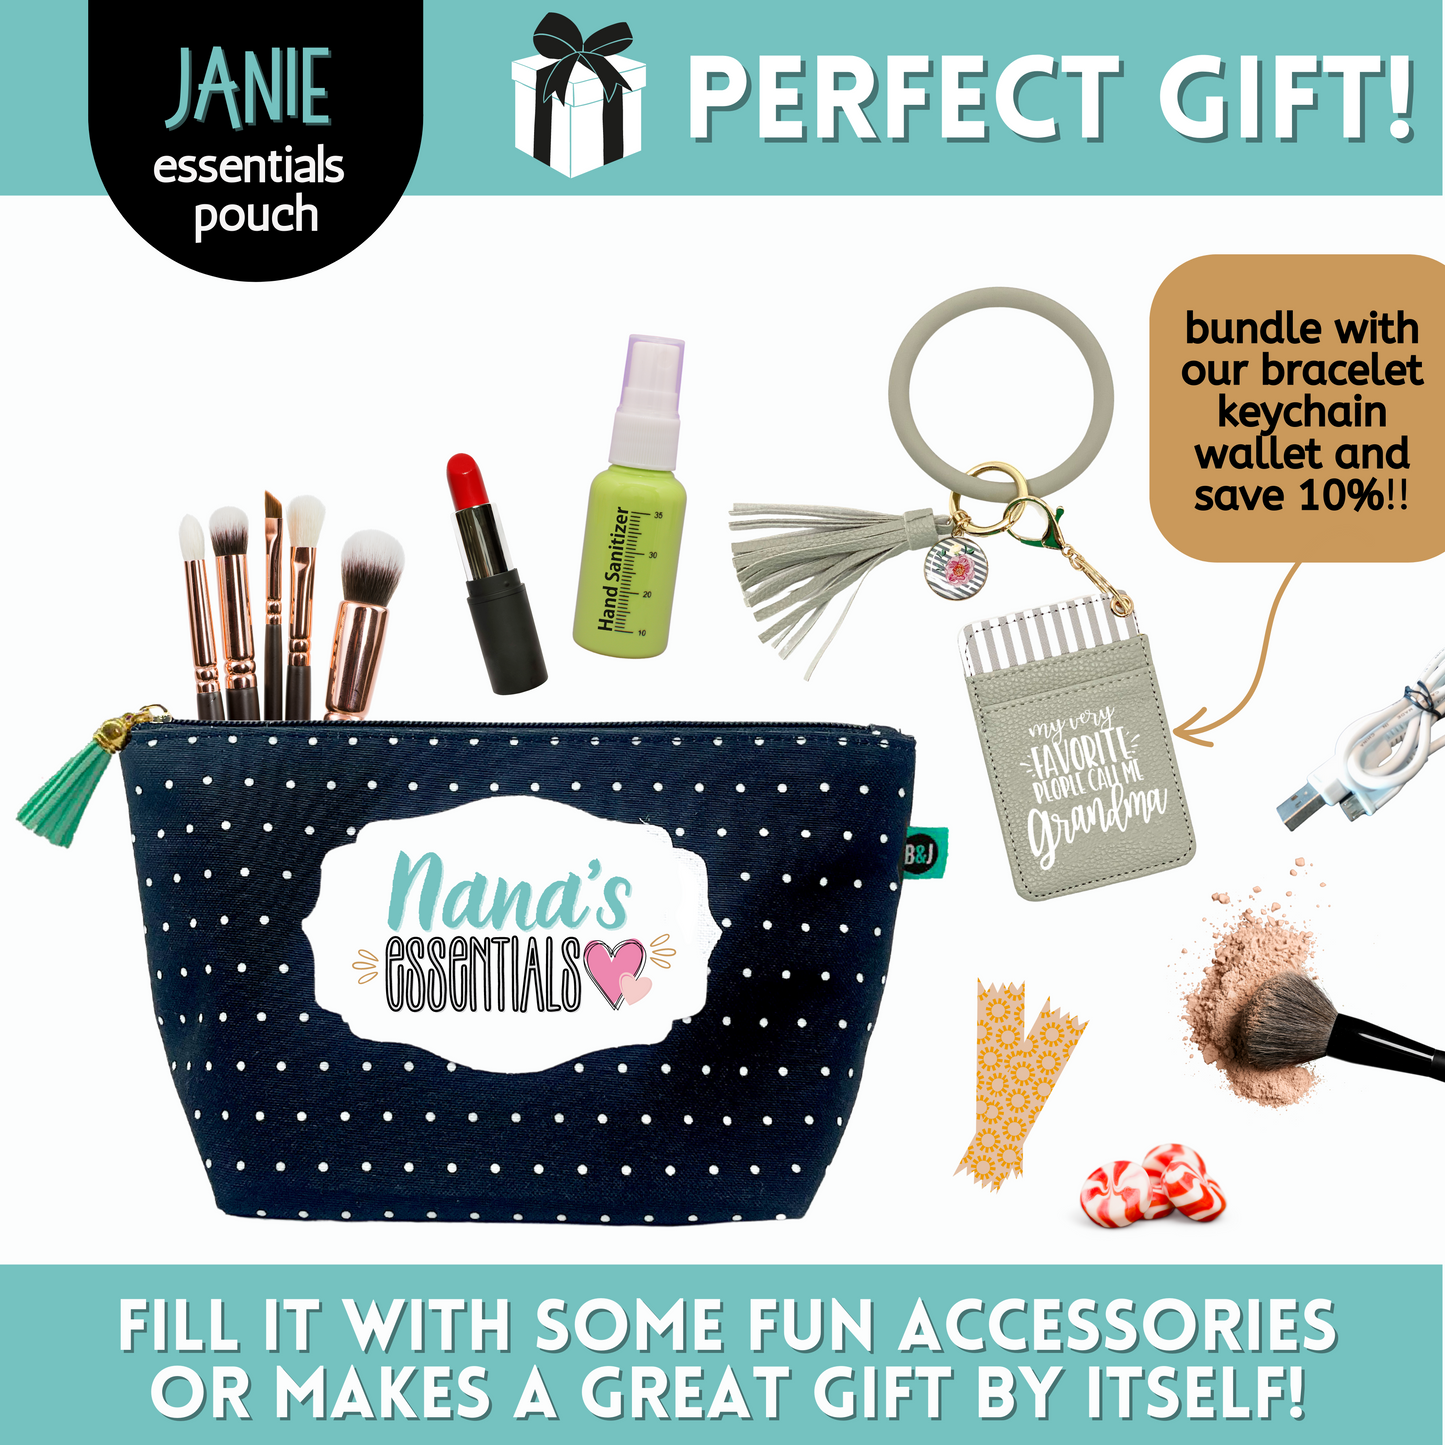 Nana's Essentials Janie Pouch Gifts for Women Dotted Makeup Bags Cosmetic Bag Travel Toiletry Makeup Pouch Pencil Bag with Zipper Best Nana Birthday Just Because Gifts